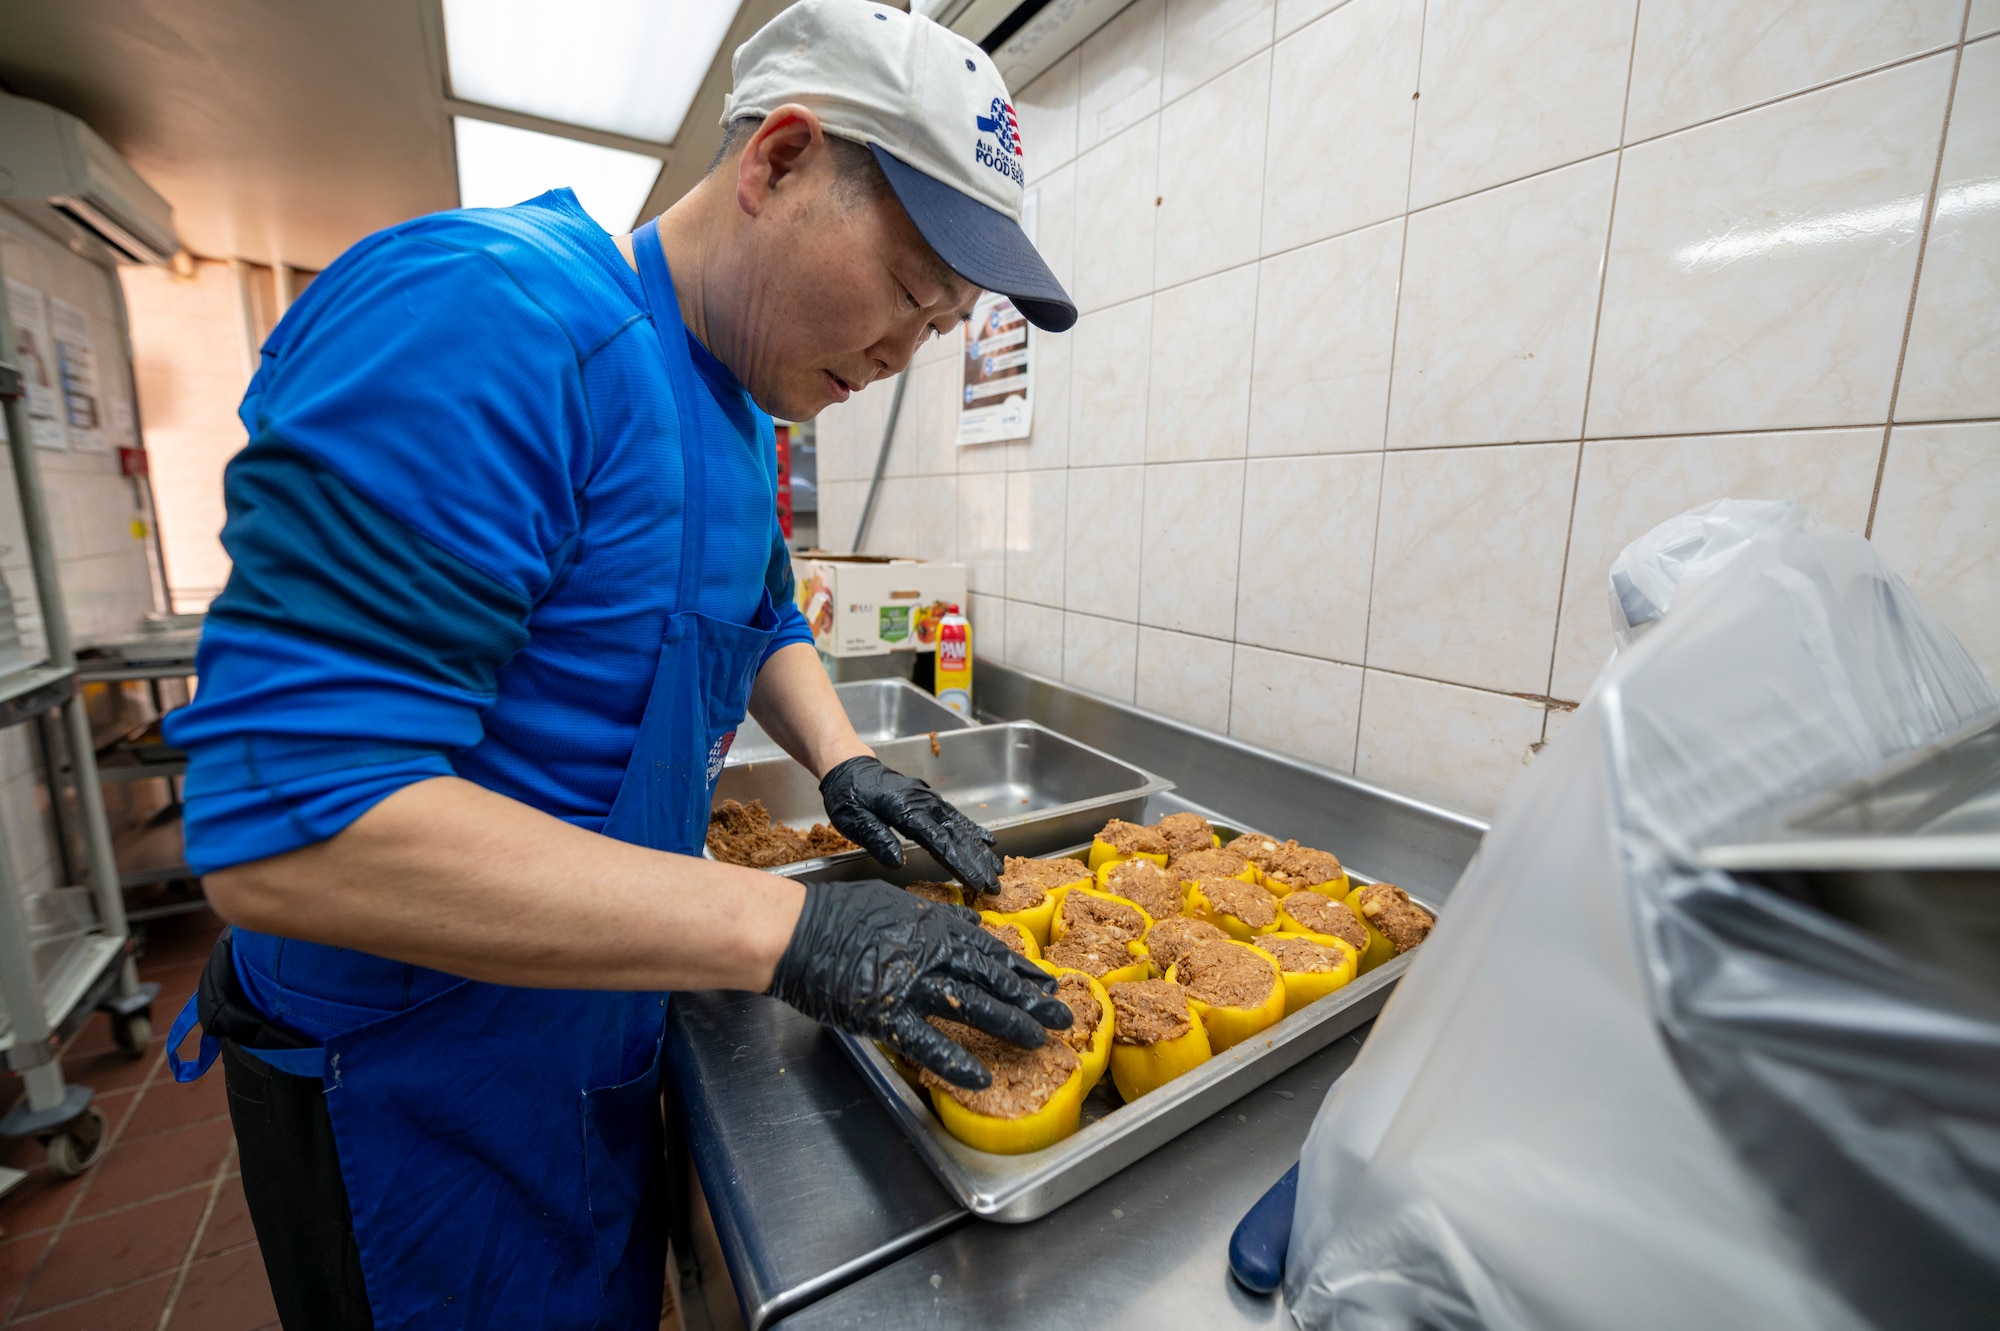 Chong Chol Yi, 51st Force Support Squadron food services specialist, prepares stuffed bell peppers at Osan Air Base, Republic of Korea, Jan. 8, 2024. Food service specialists from the 51st FSS work together to prepare, cook and serve food to Osan Airmen, keeping them nourished and ready to accomplish their daily tasks. (U.S. Air Force photo by Senior Airman Trevor Gordnier)